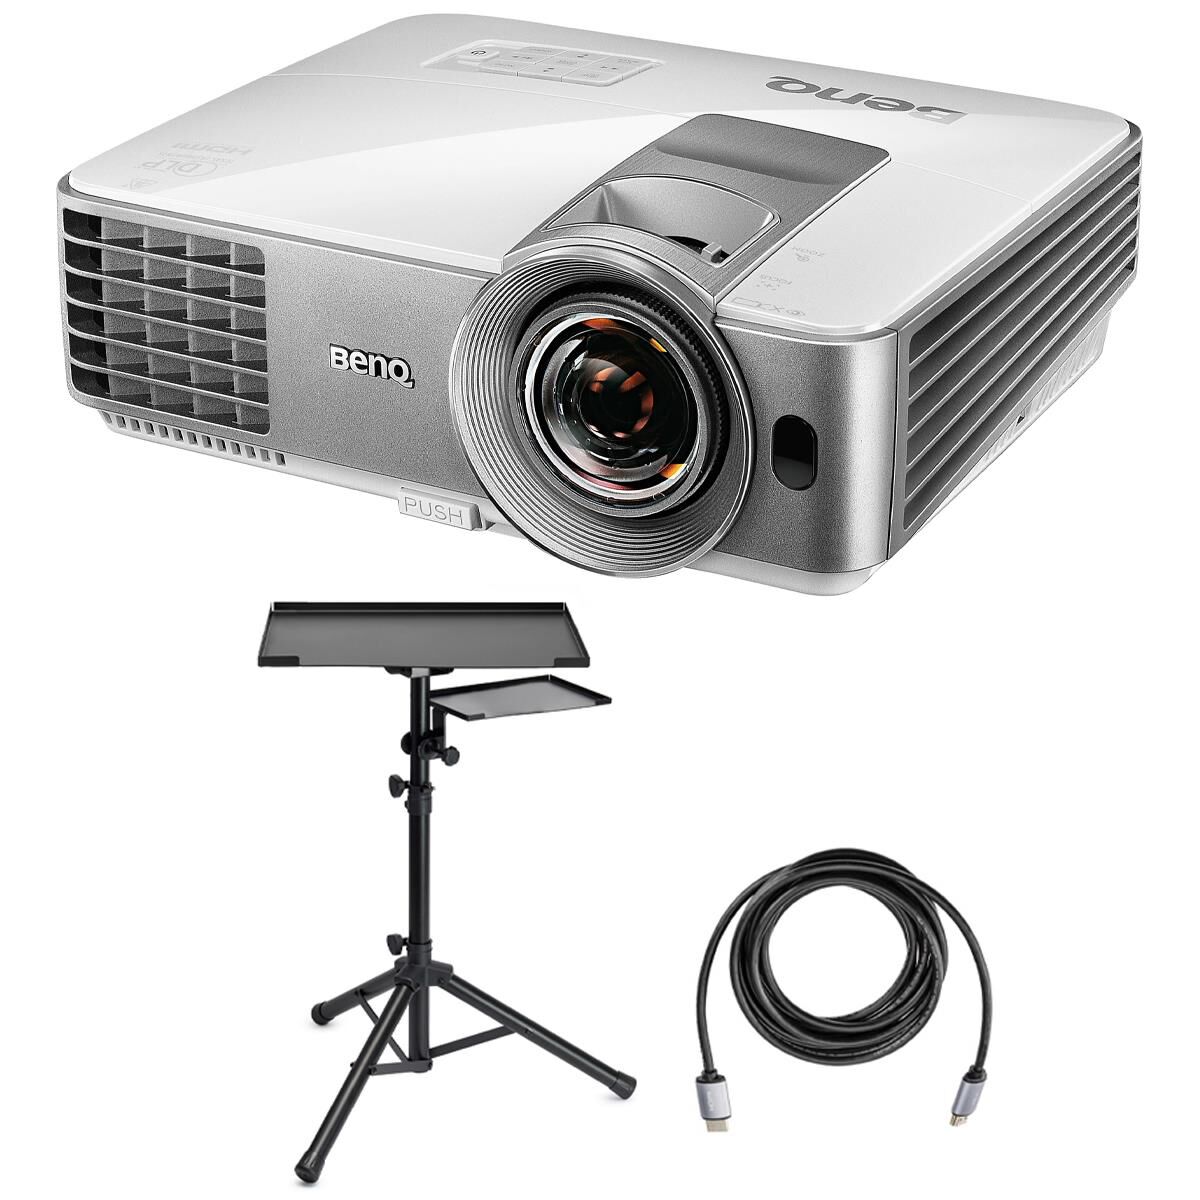 BenQ TH575 Full HD DLP Home Theater Gaming Projector with Stand, Cable